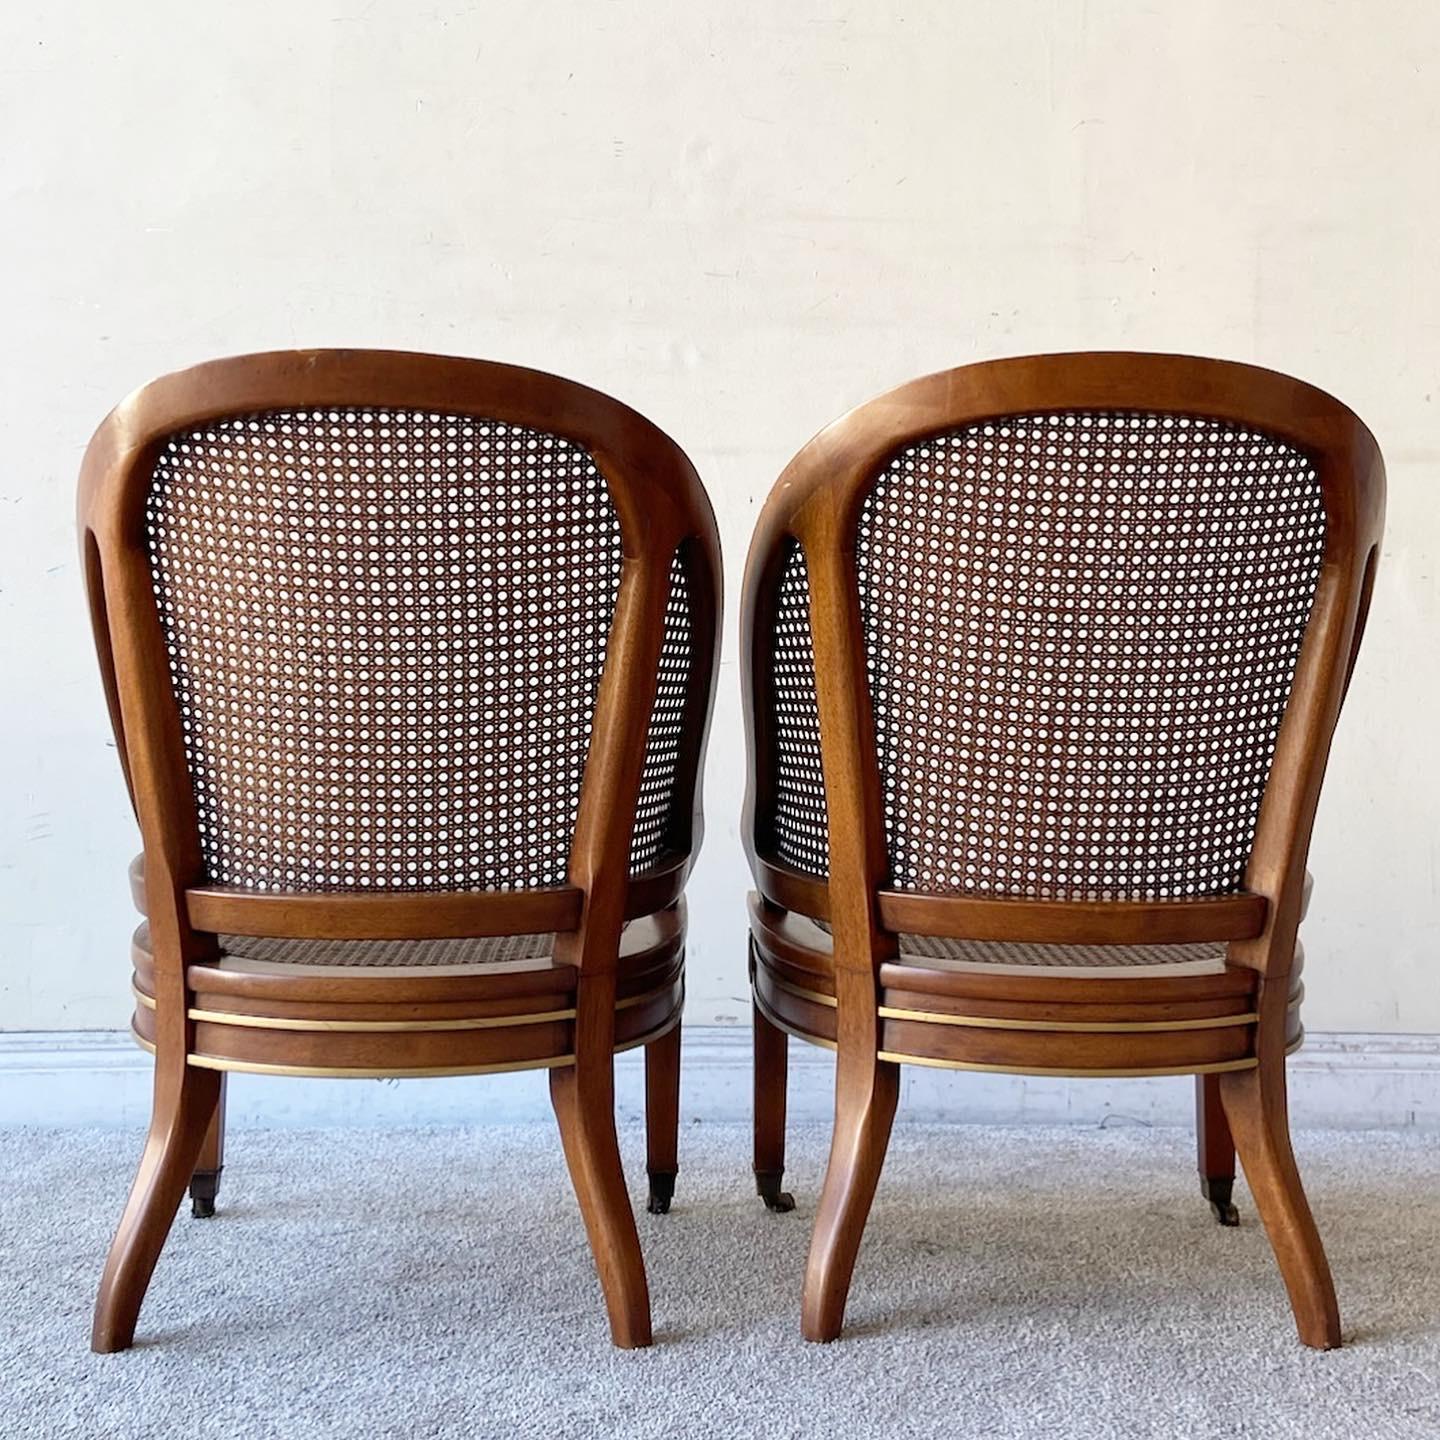 American Early 20th Century, Cane Club Chairs on Casters